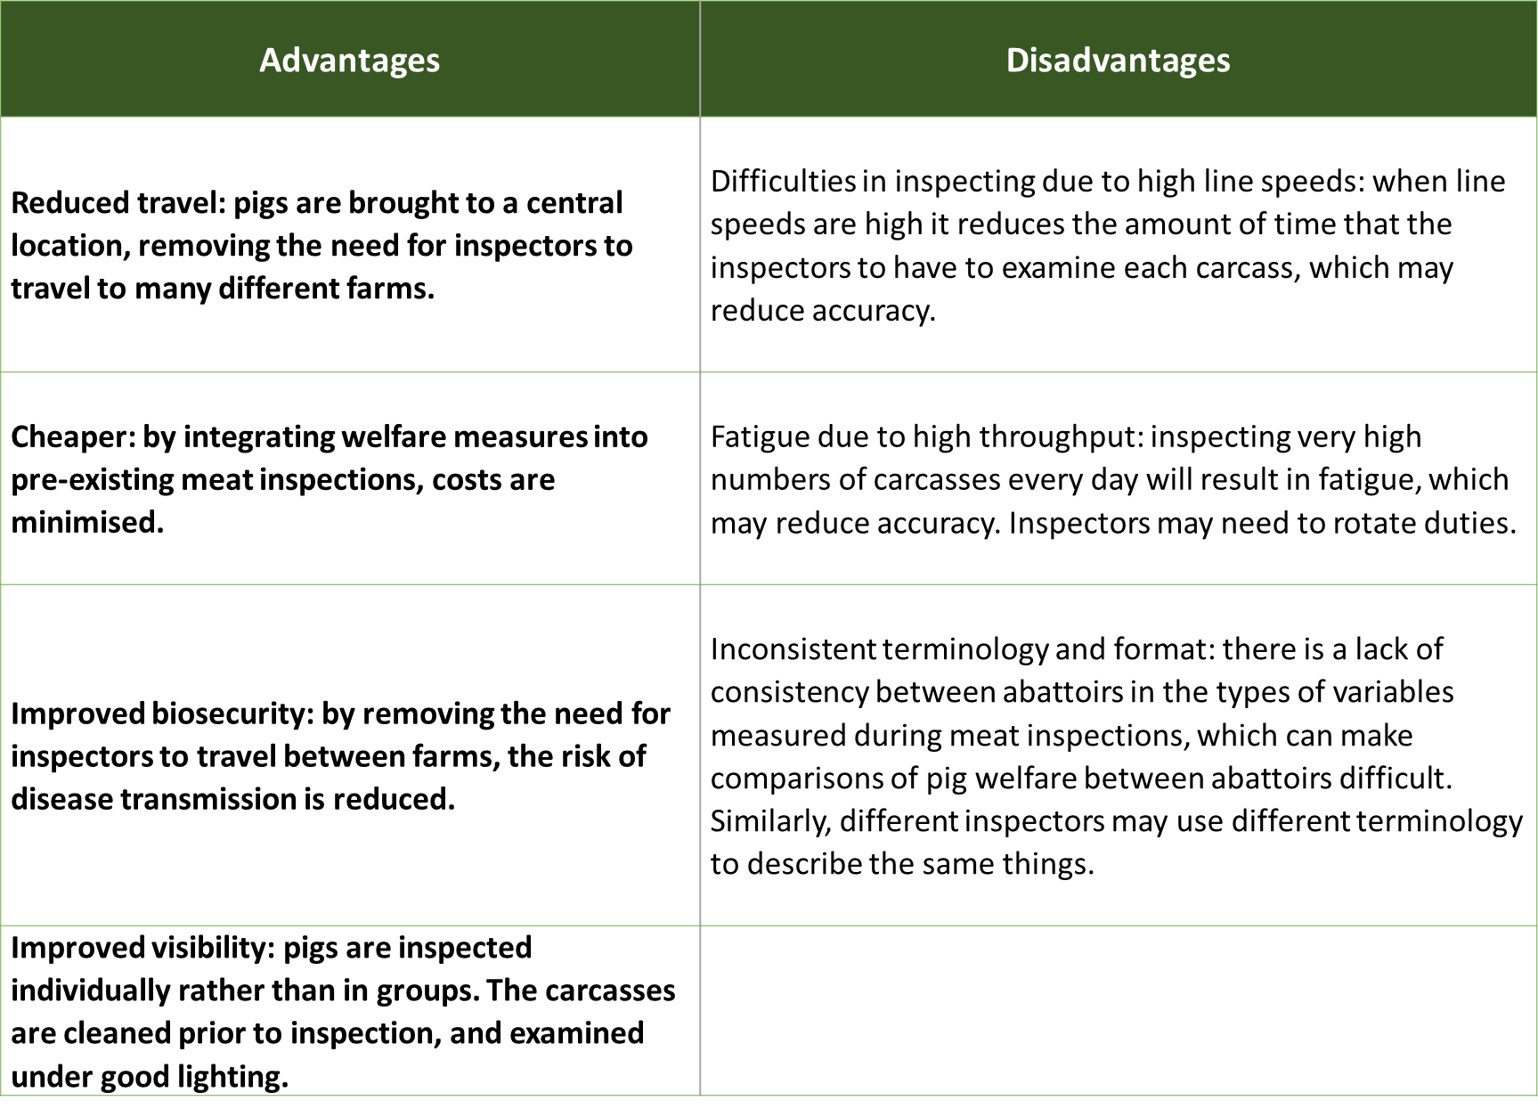 Table 1. Advantages and disadvantages of assessing pig welfare at the abattoir